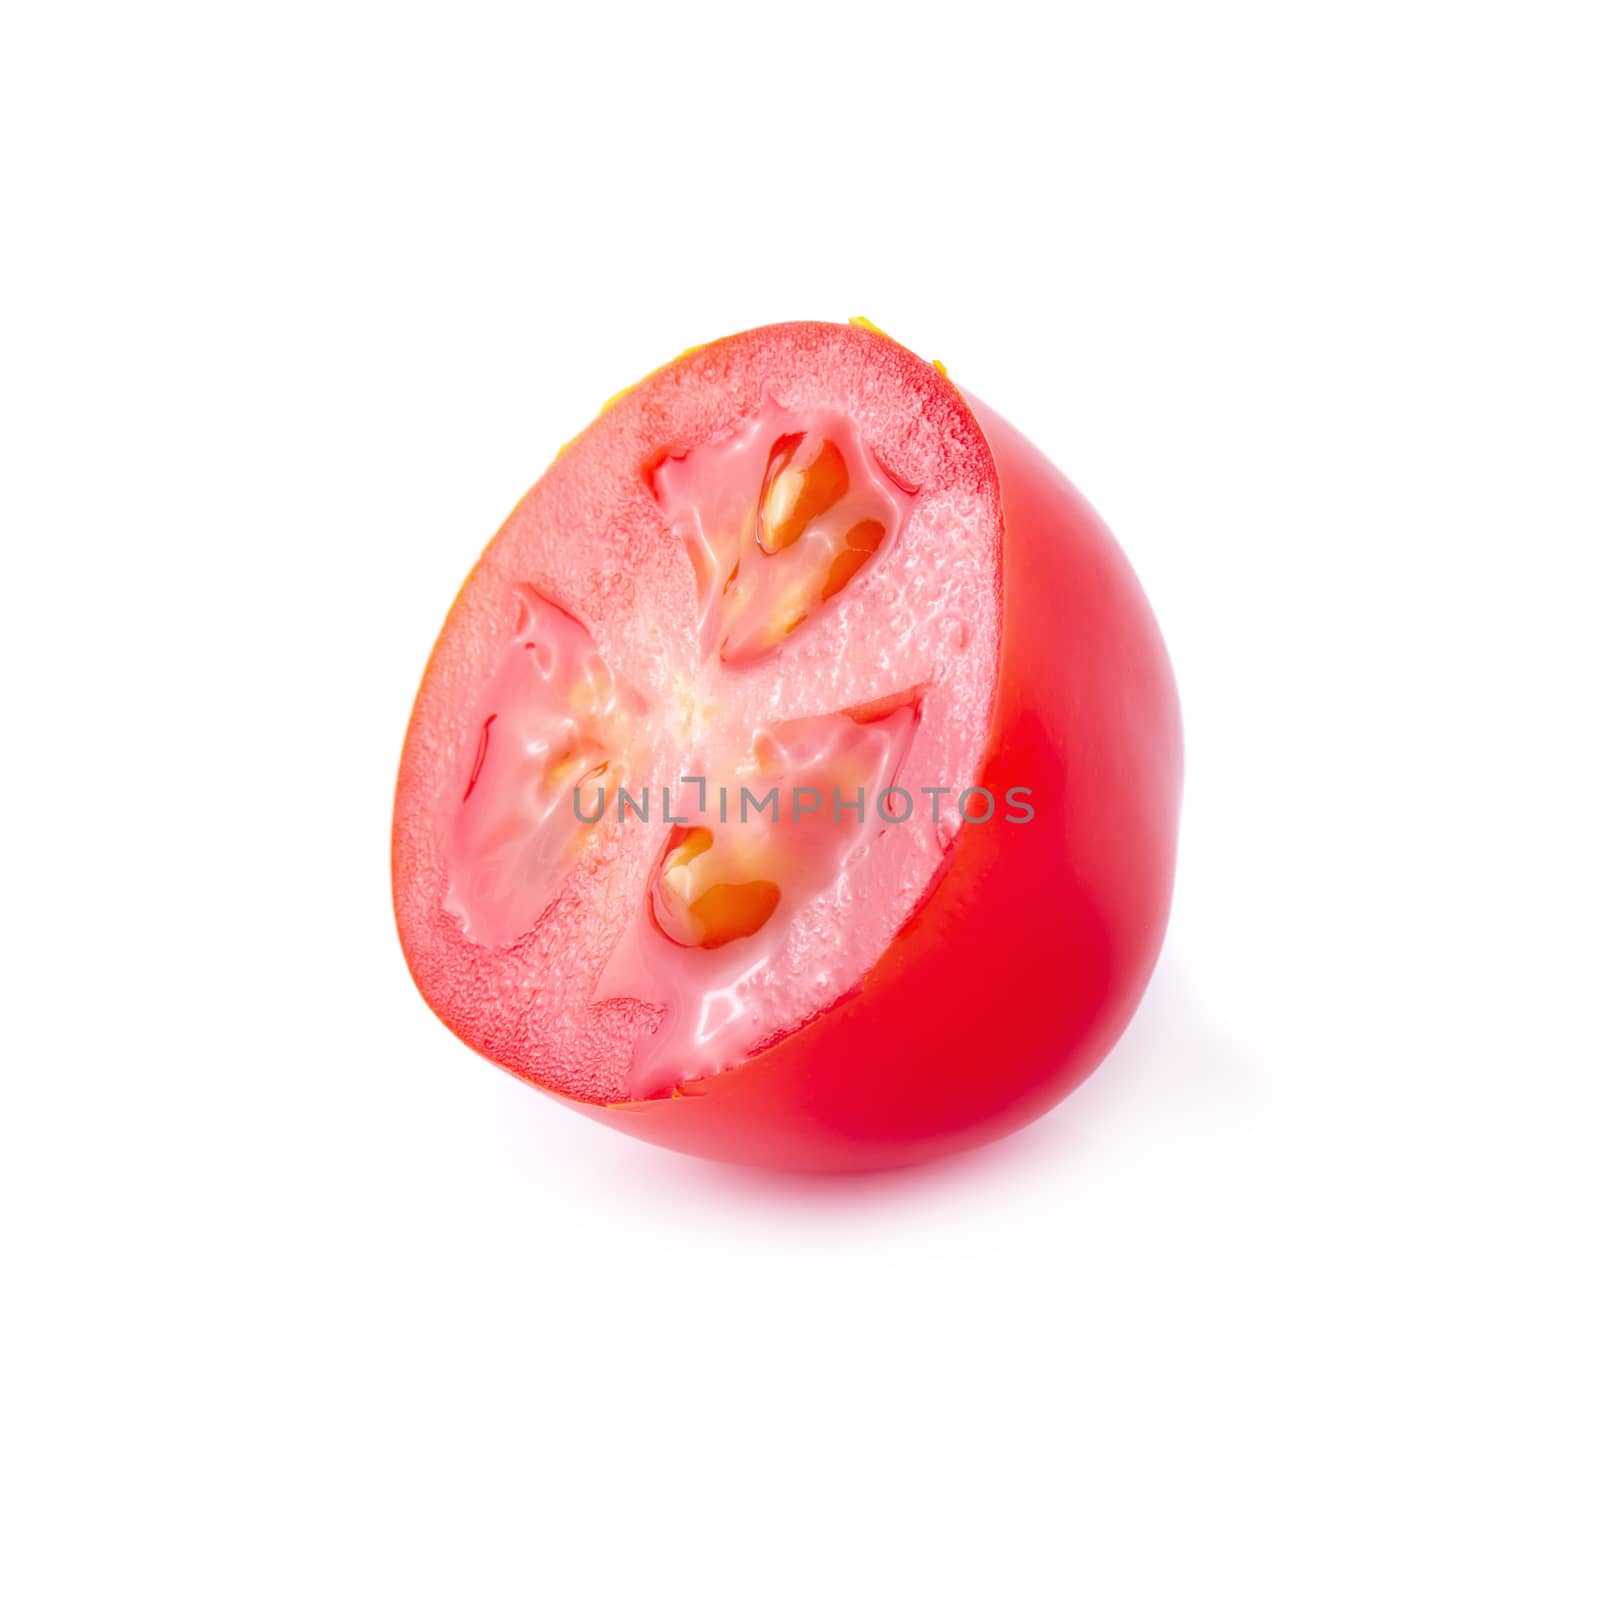 Red ripe tomatoes isolated on a white background